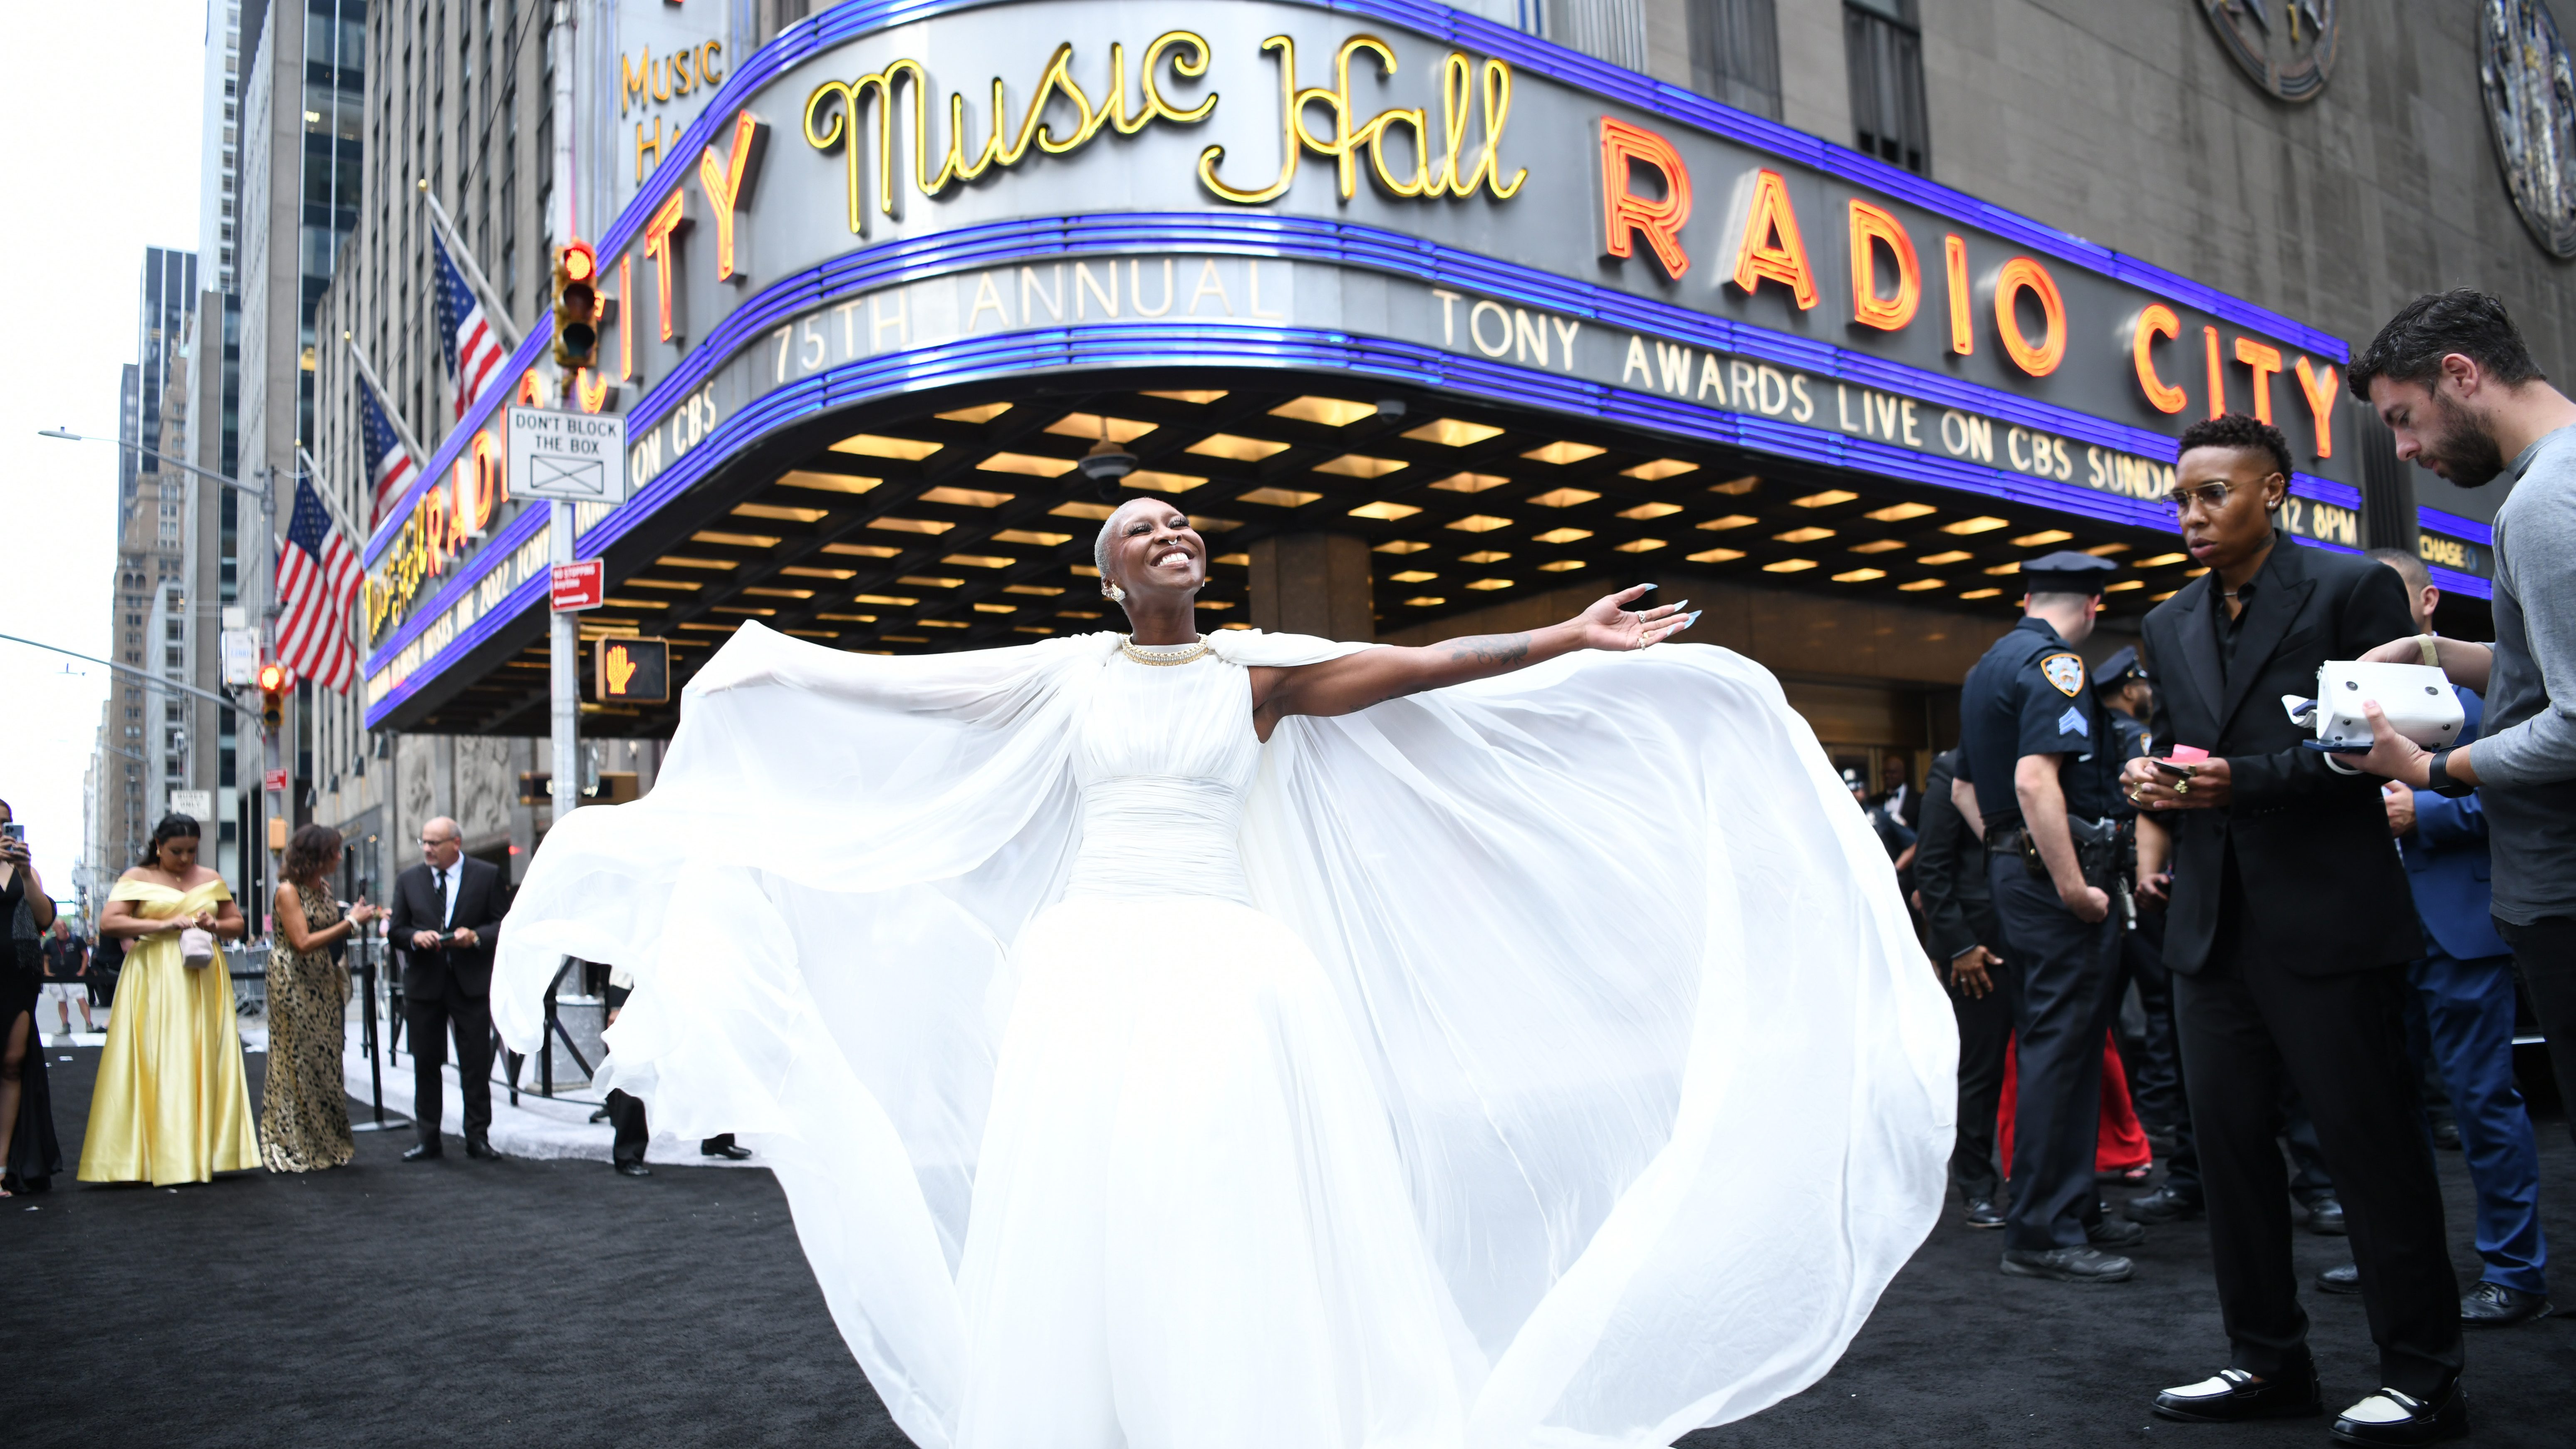 Tony Awards 2022: Red carpet fashion moments from Ariana DeBose, Jessica  Chastain, Cynthia Erivo and more - Good Morning America